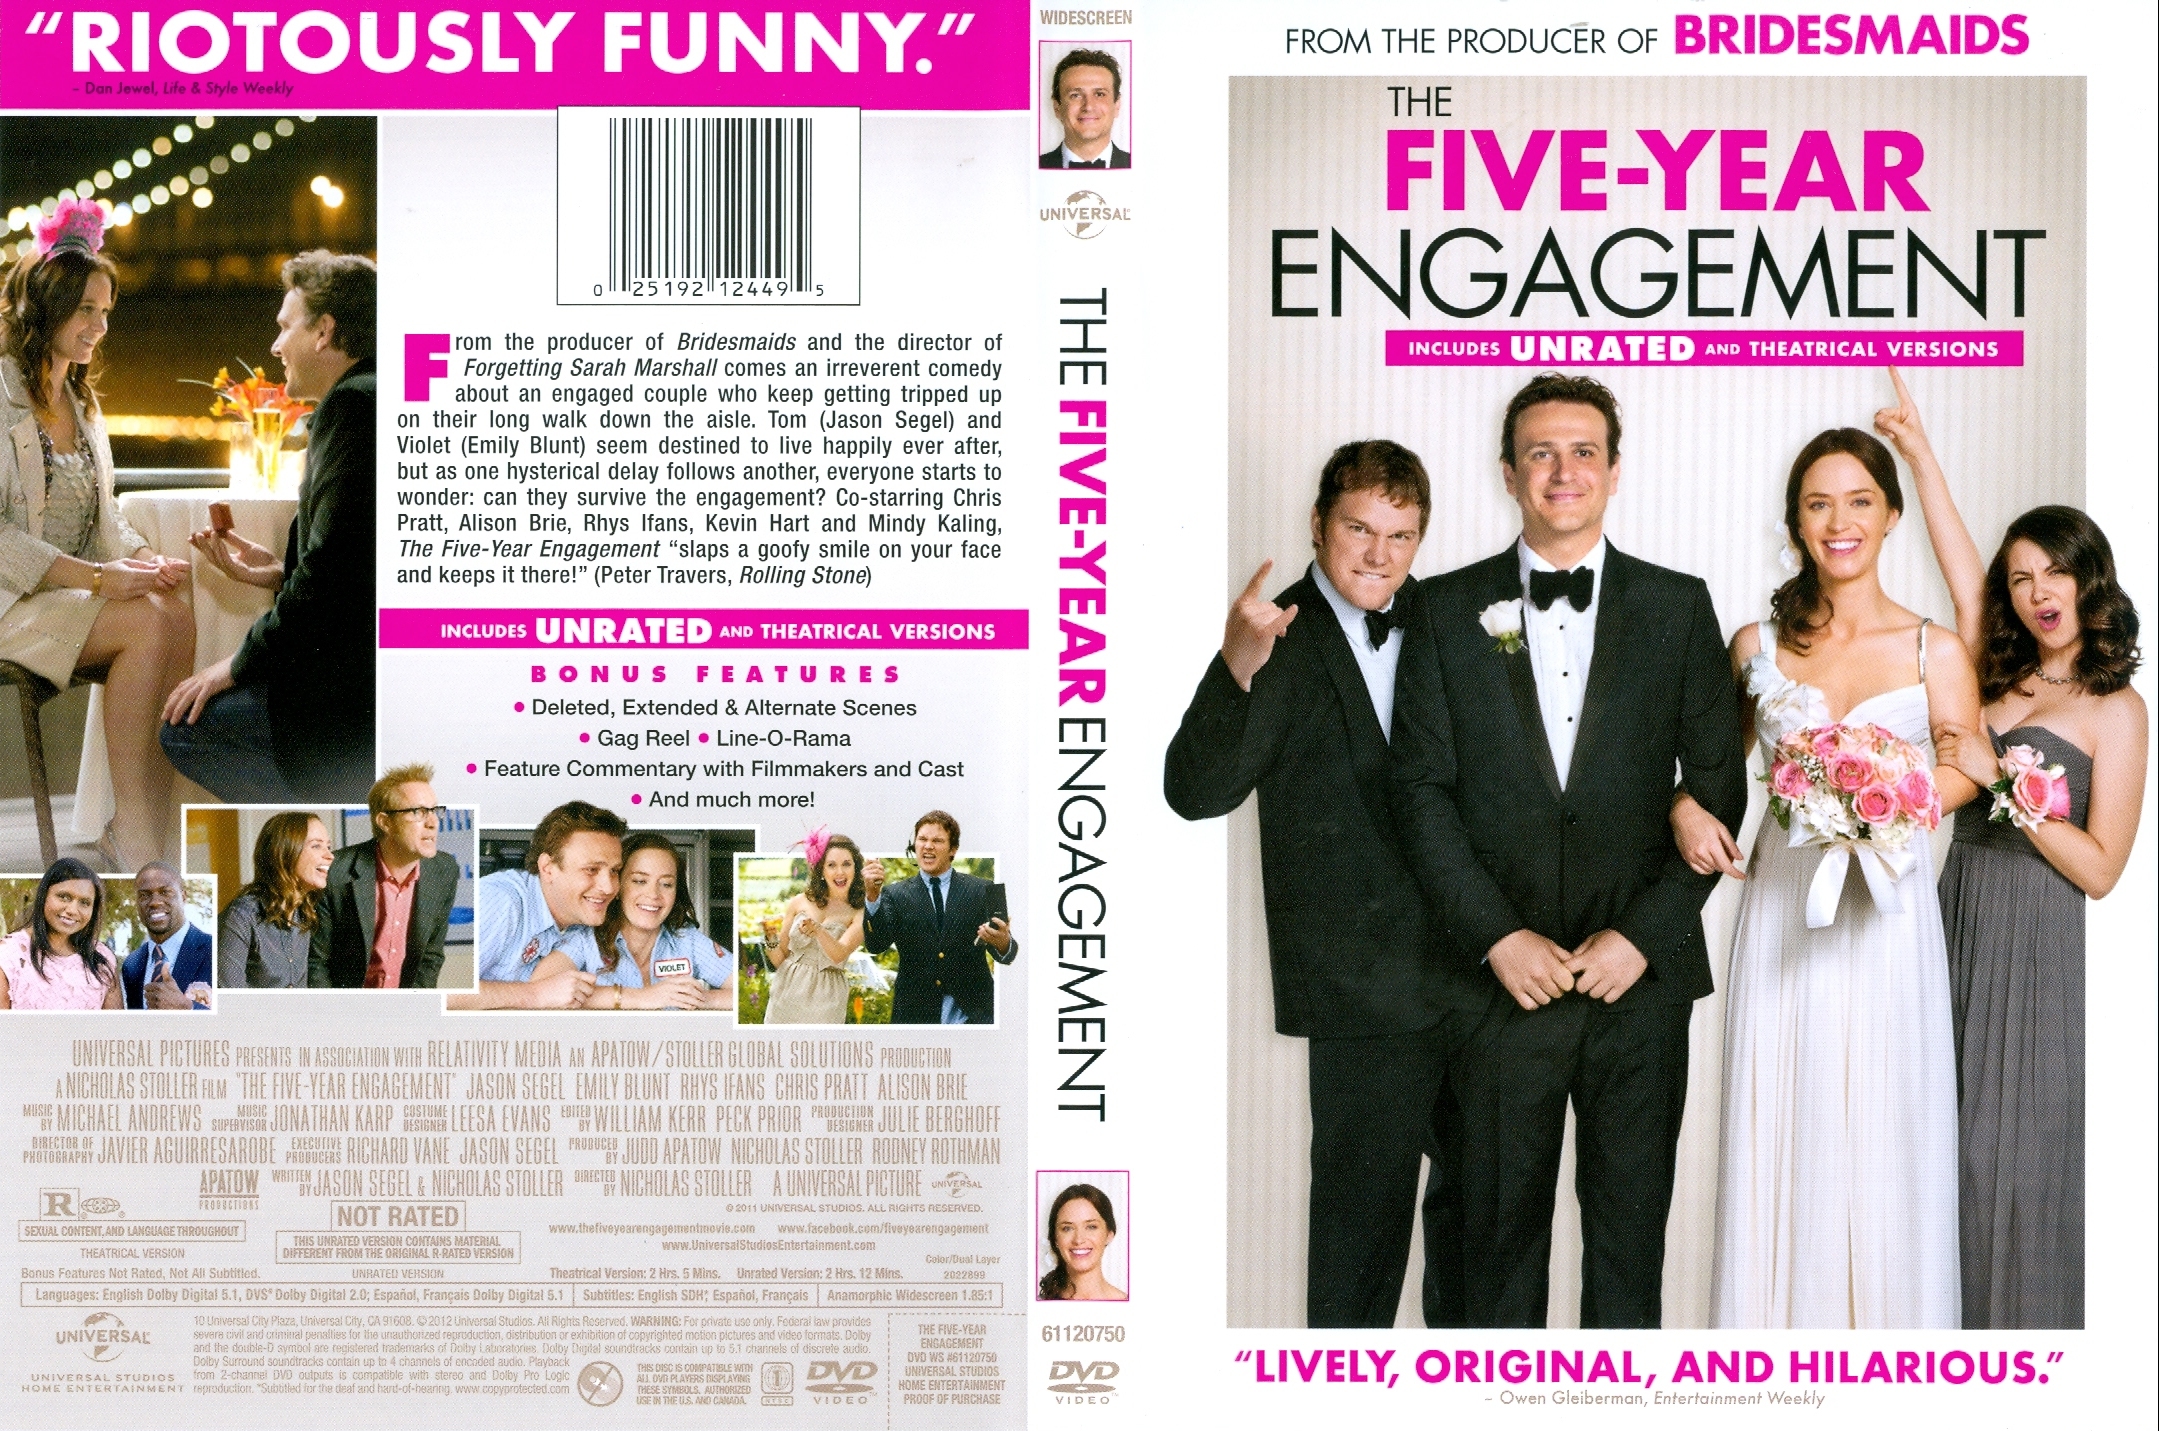 The Five-Year Engagement #4